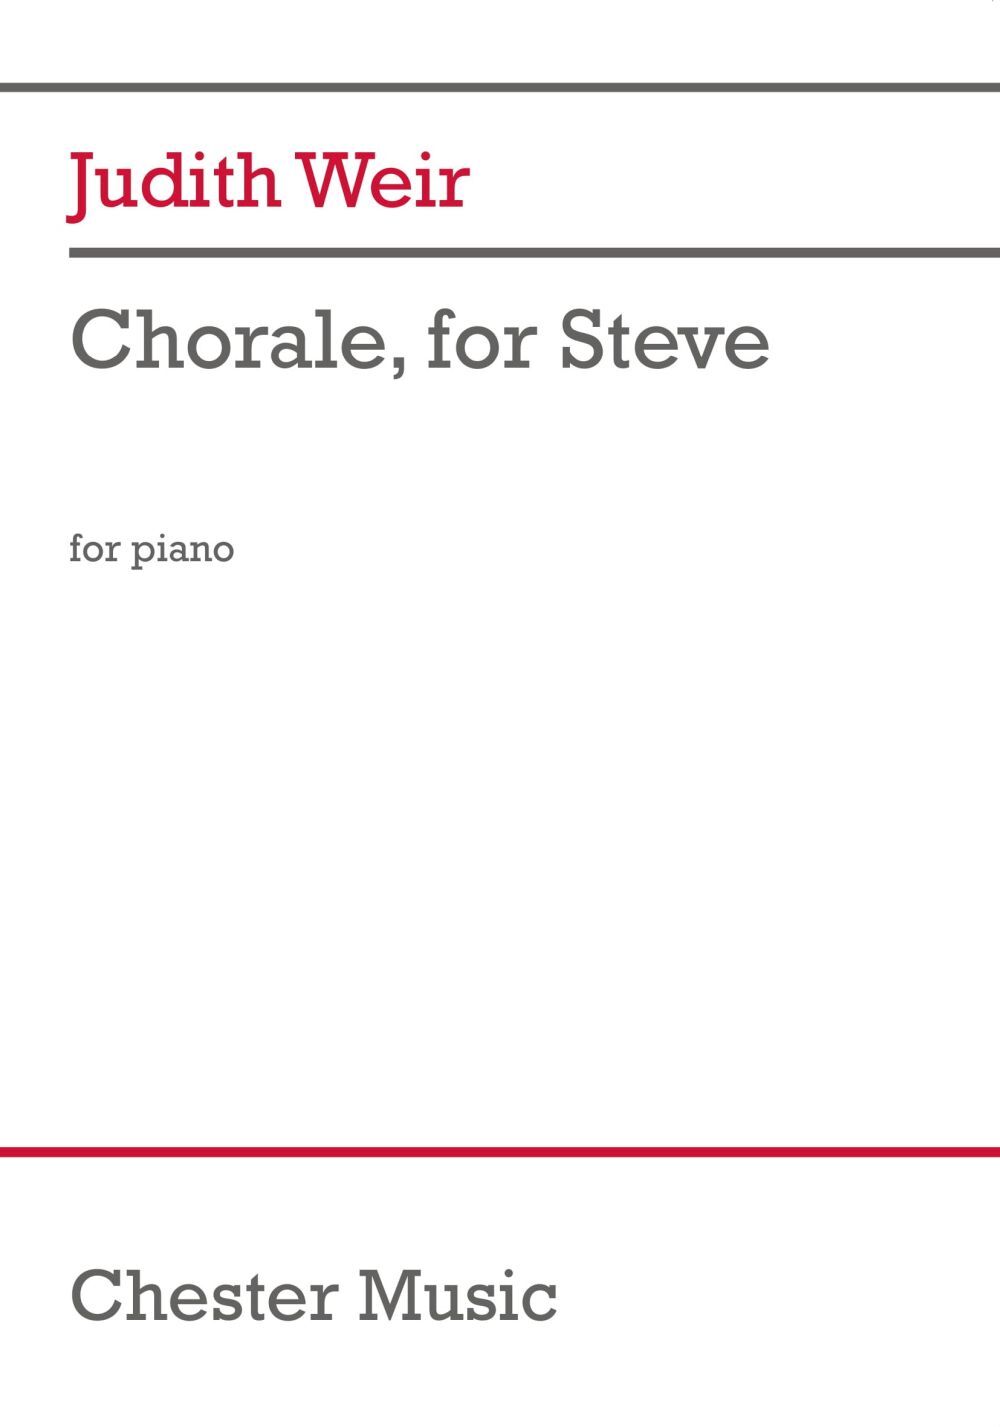 Cover: 5020679267974 | Chorale, for Steve | Judith Weir | Partitur | 2019 | Chester Music